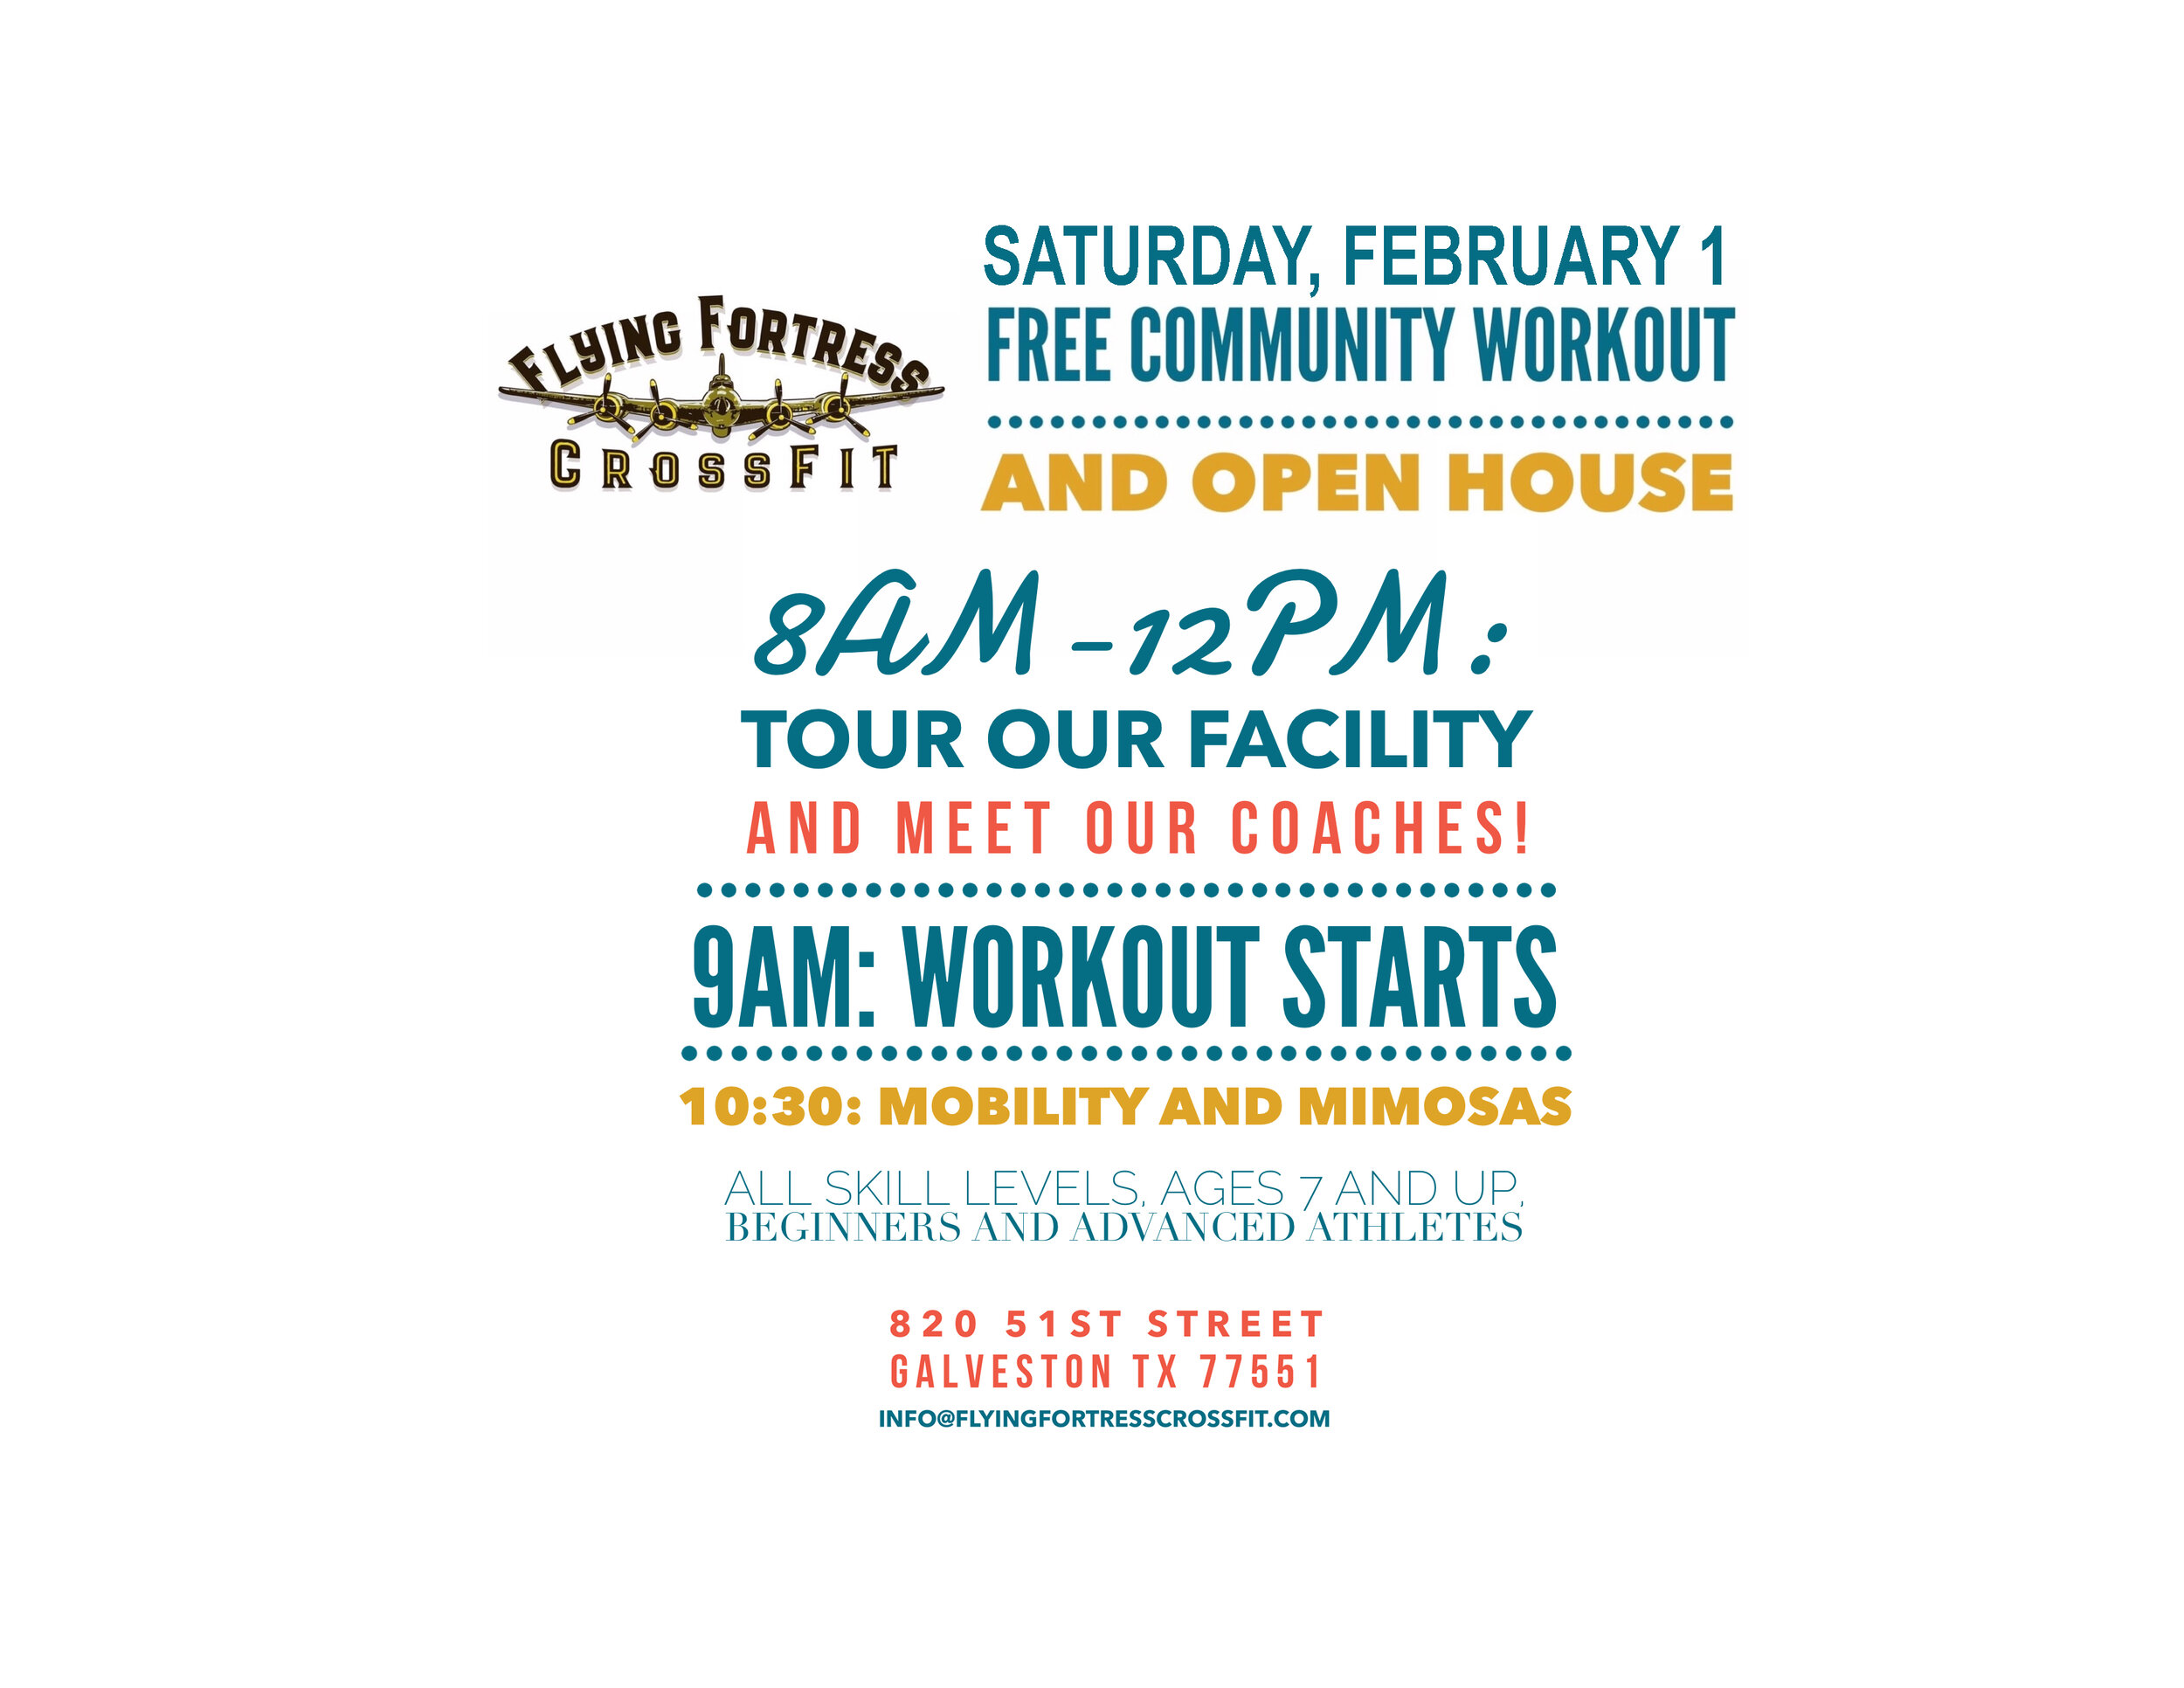 Mark your calendars for Saturday, February 1st at 9AM and join us for our first FREE Community Workout of the year and Open House. Tell all your friends and family!! We want to show off our amazing gym!! We will also have a CrossFit Kids workout for ages 7 and older. Parents are encouraged to participate as well!! Following the workout we will have our "Mobility &amp; Mimosas" class led by coach Jess. We want to extend this "OPEN HOUSE" invitation to anyone who would like to see our facility, meet our coaches, but may not want to workout. So...spread the word! The gym will be open to the public from 8-12. If you have any questions, please contact kara@flyingfortresscrossfit.com *Please  SIGN A WAIVER  if you plan on working out or doing the mobility class!!!